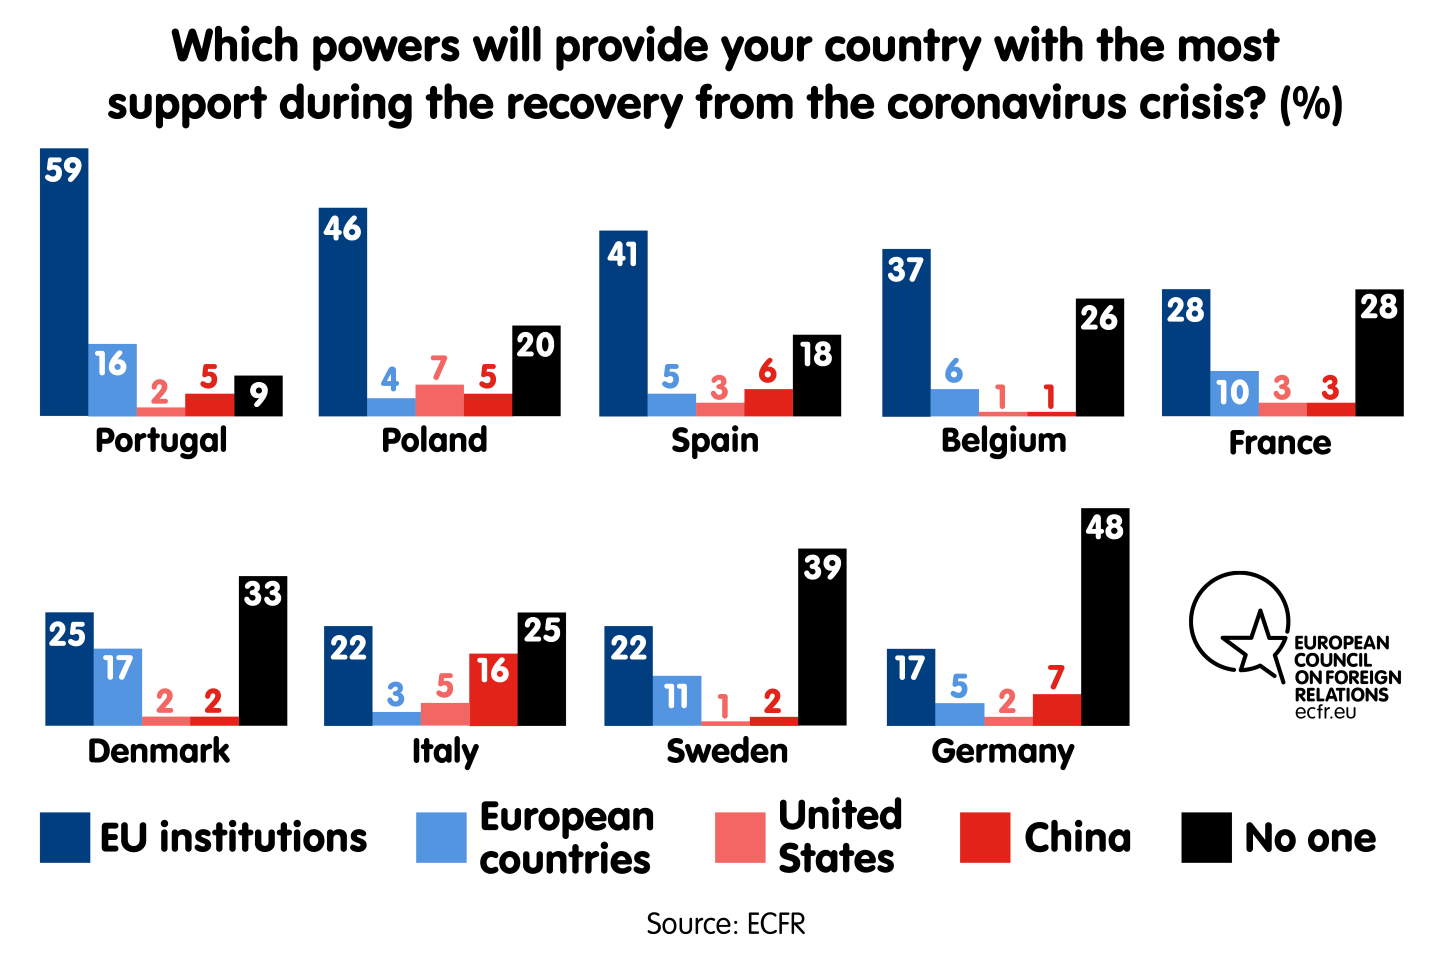 Which powers will provide your country with the most support during the recoveryfrom the coronavirus crisis?